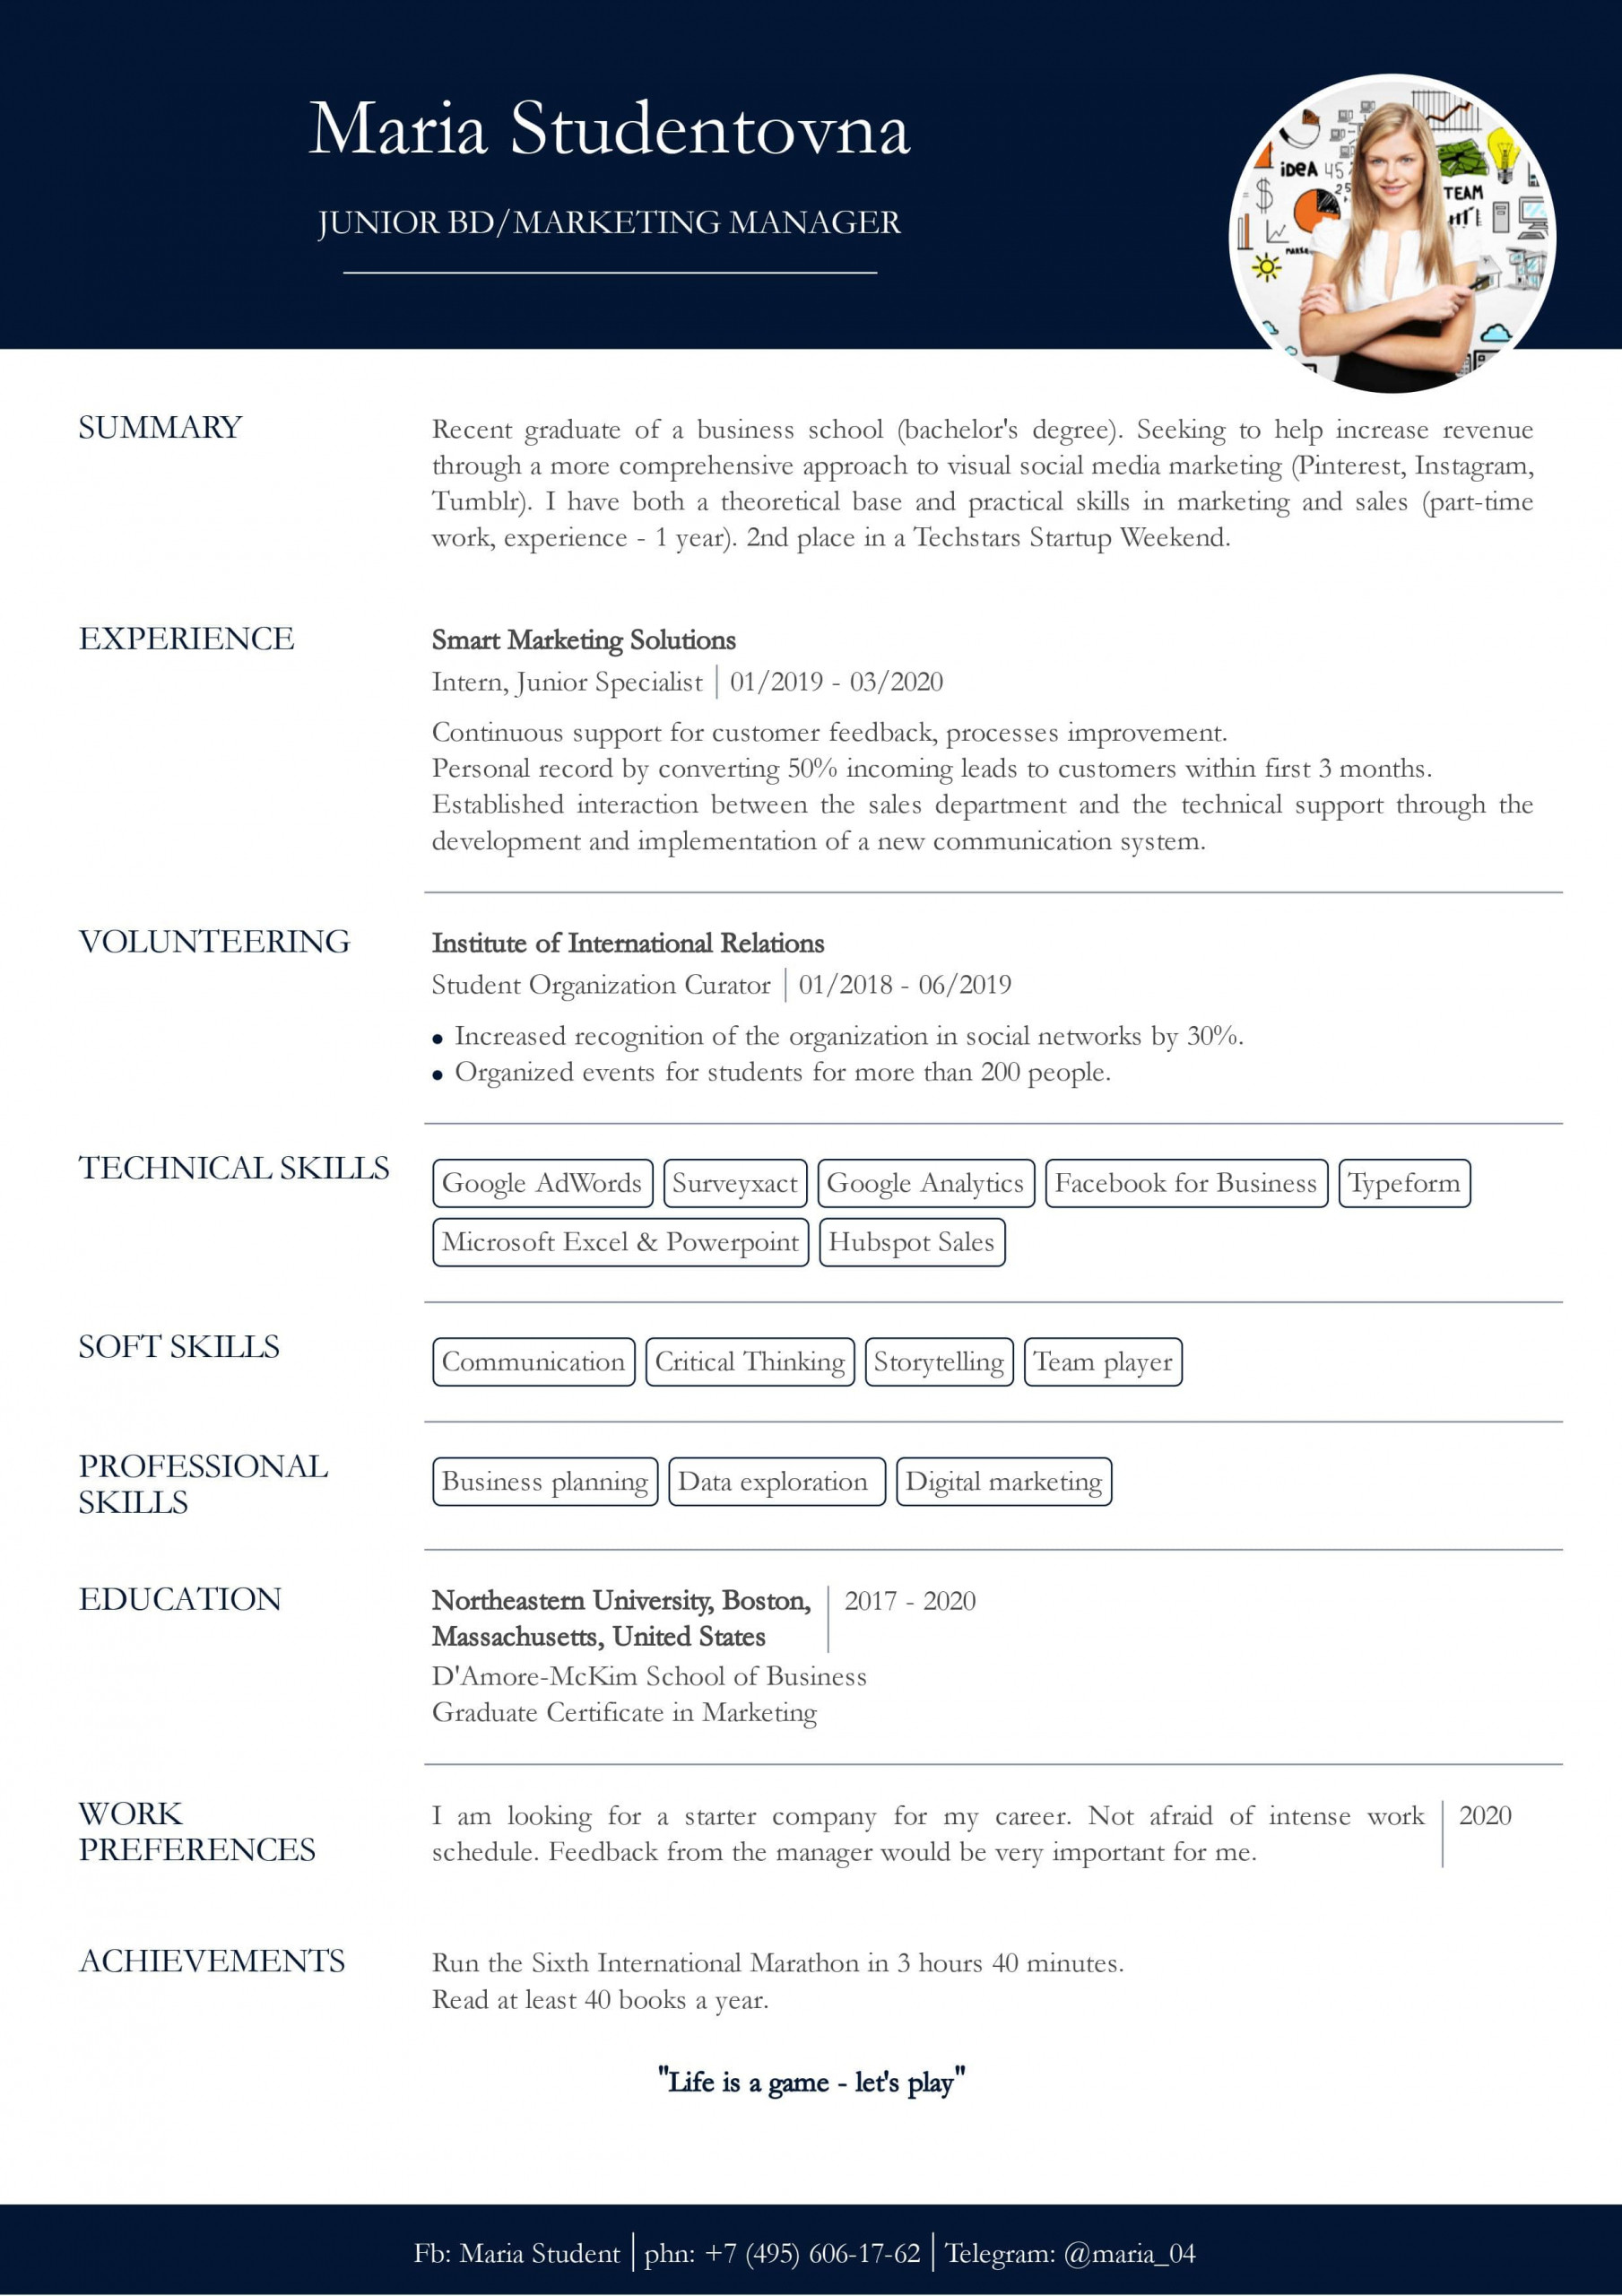 Resume Template for High School Student No Work Experience Resume with No Work Experience. Sample for Students. – Cv2you Blog